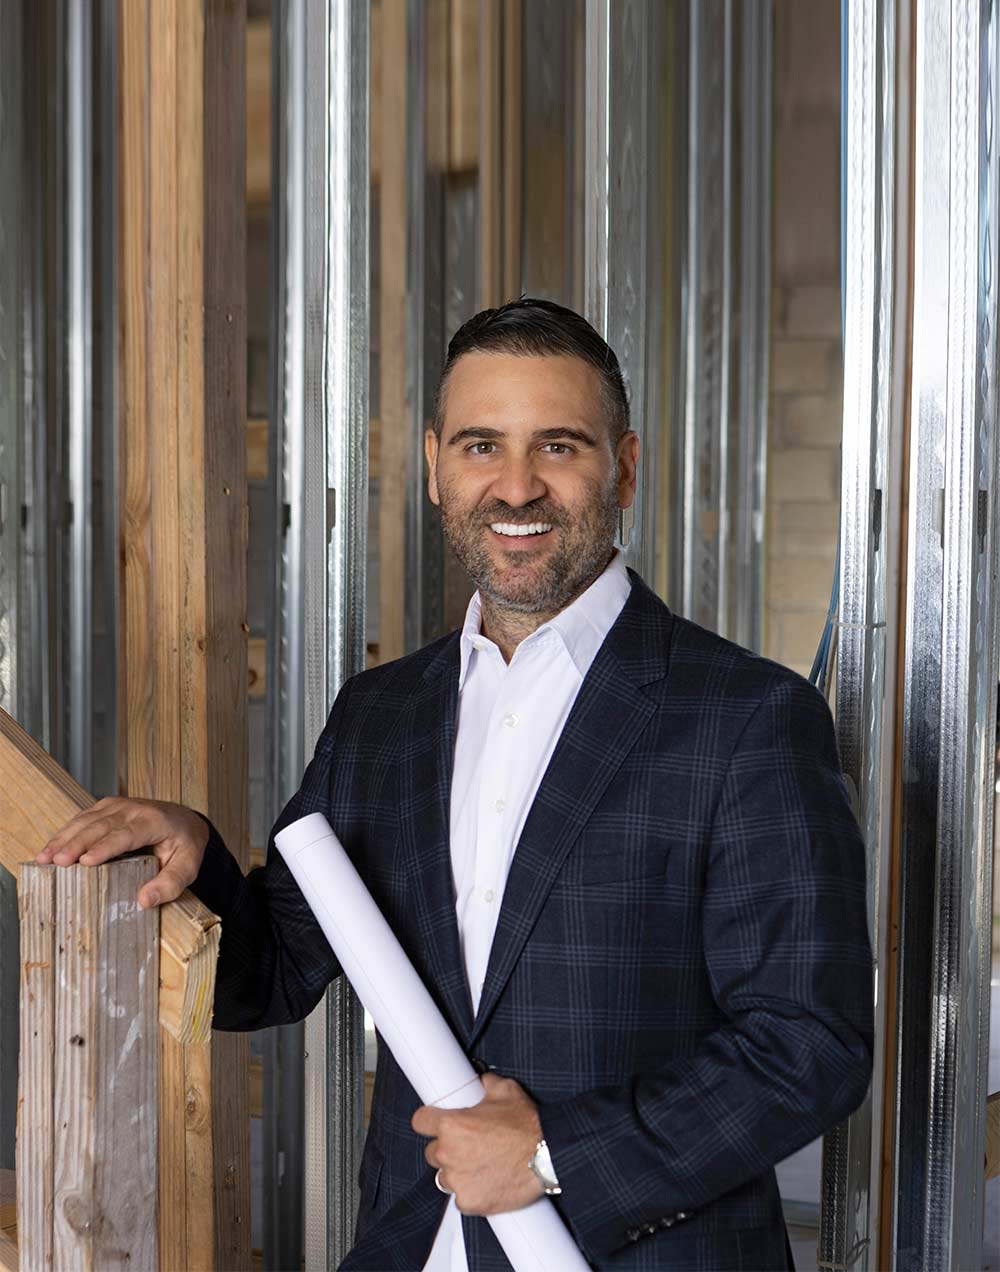 President Misha Ezratti of GL Homes featured in The South Florida Business Journal 250 Power Leaders in South Florida.